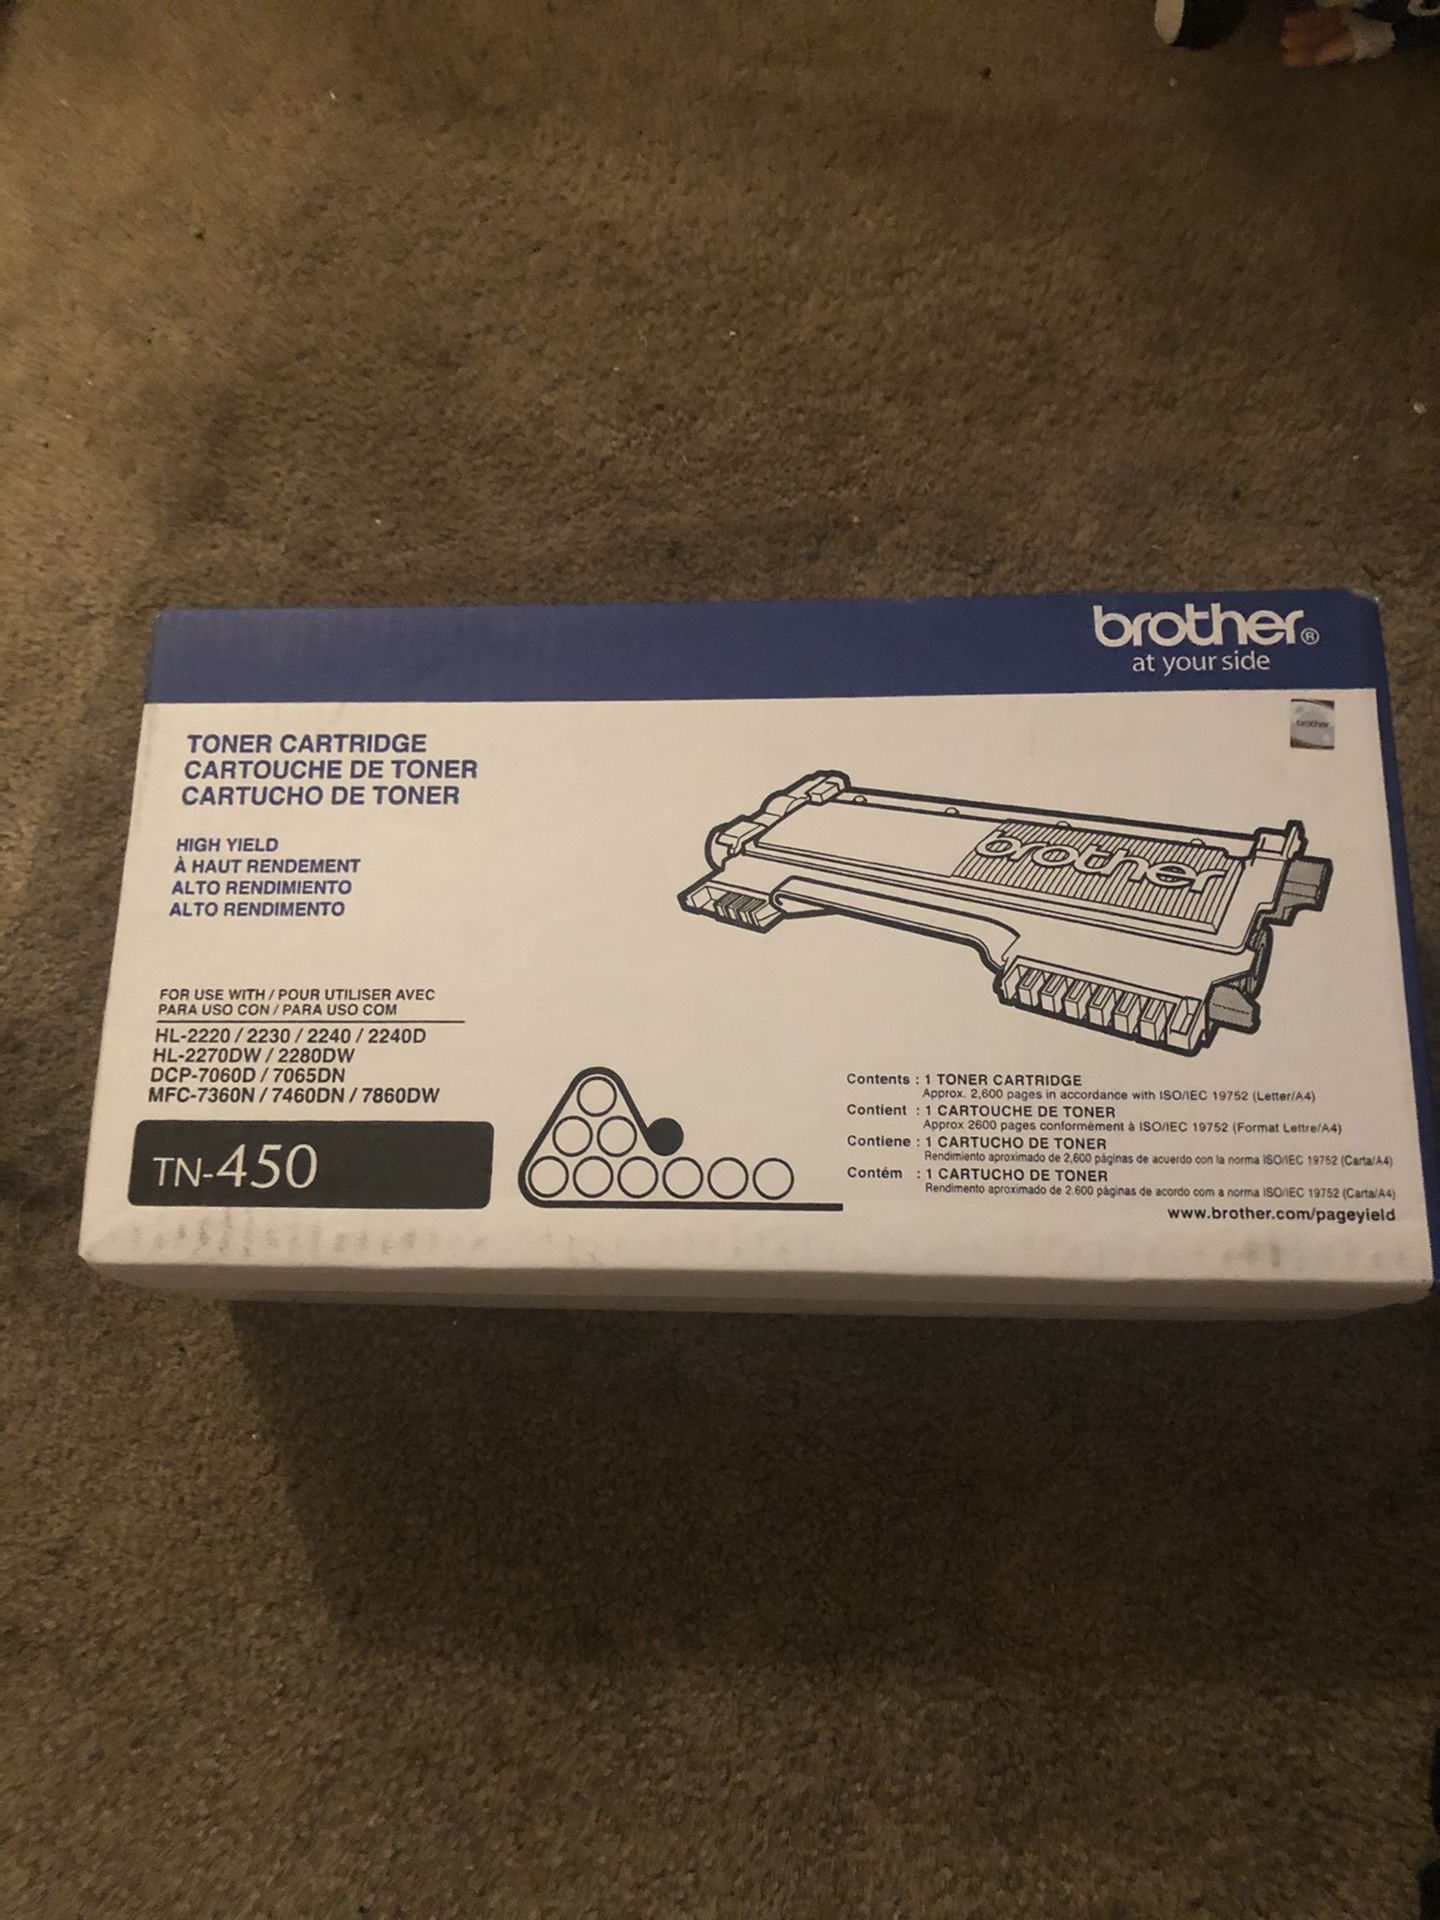 *NEW* Brother TN-450 Black High-Yield Toner Cartridge Brand New Factory Sealed. Condition is New.